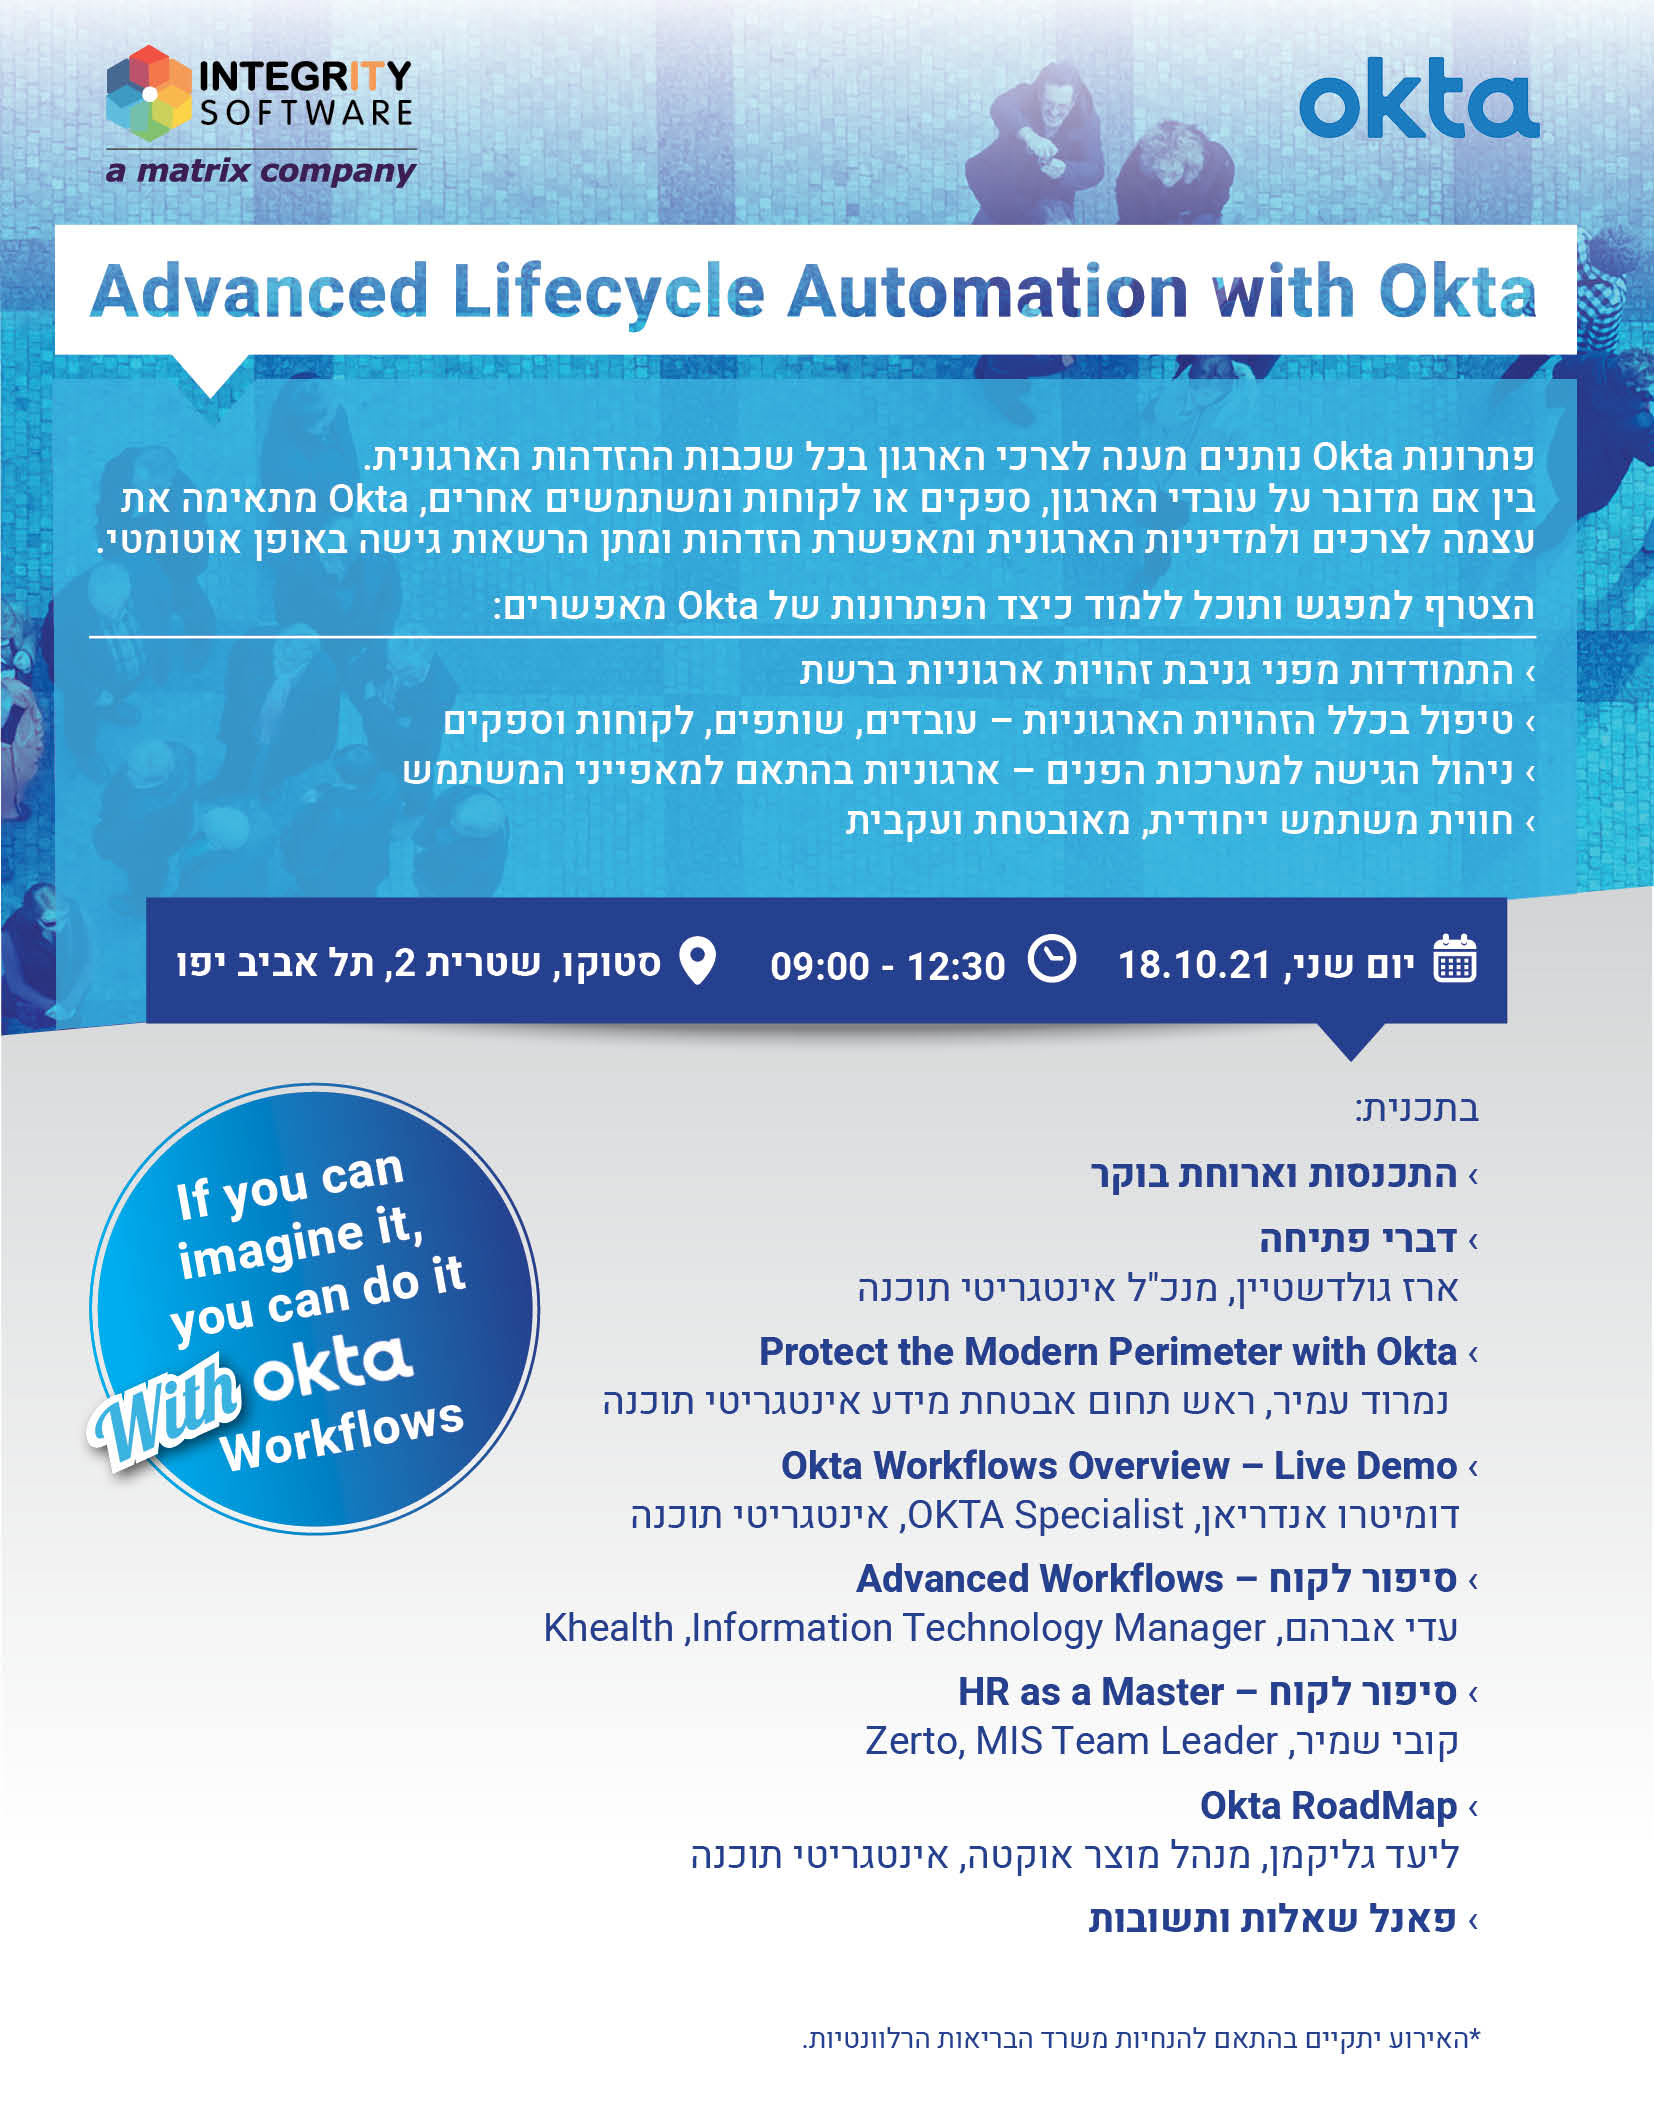 Advanced Lifecycle Automation with Okta